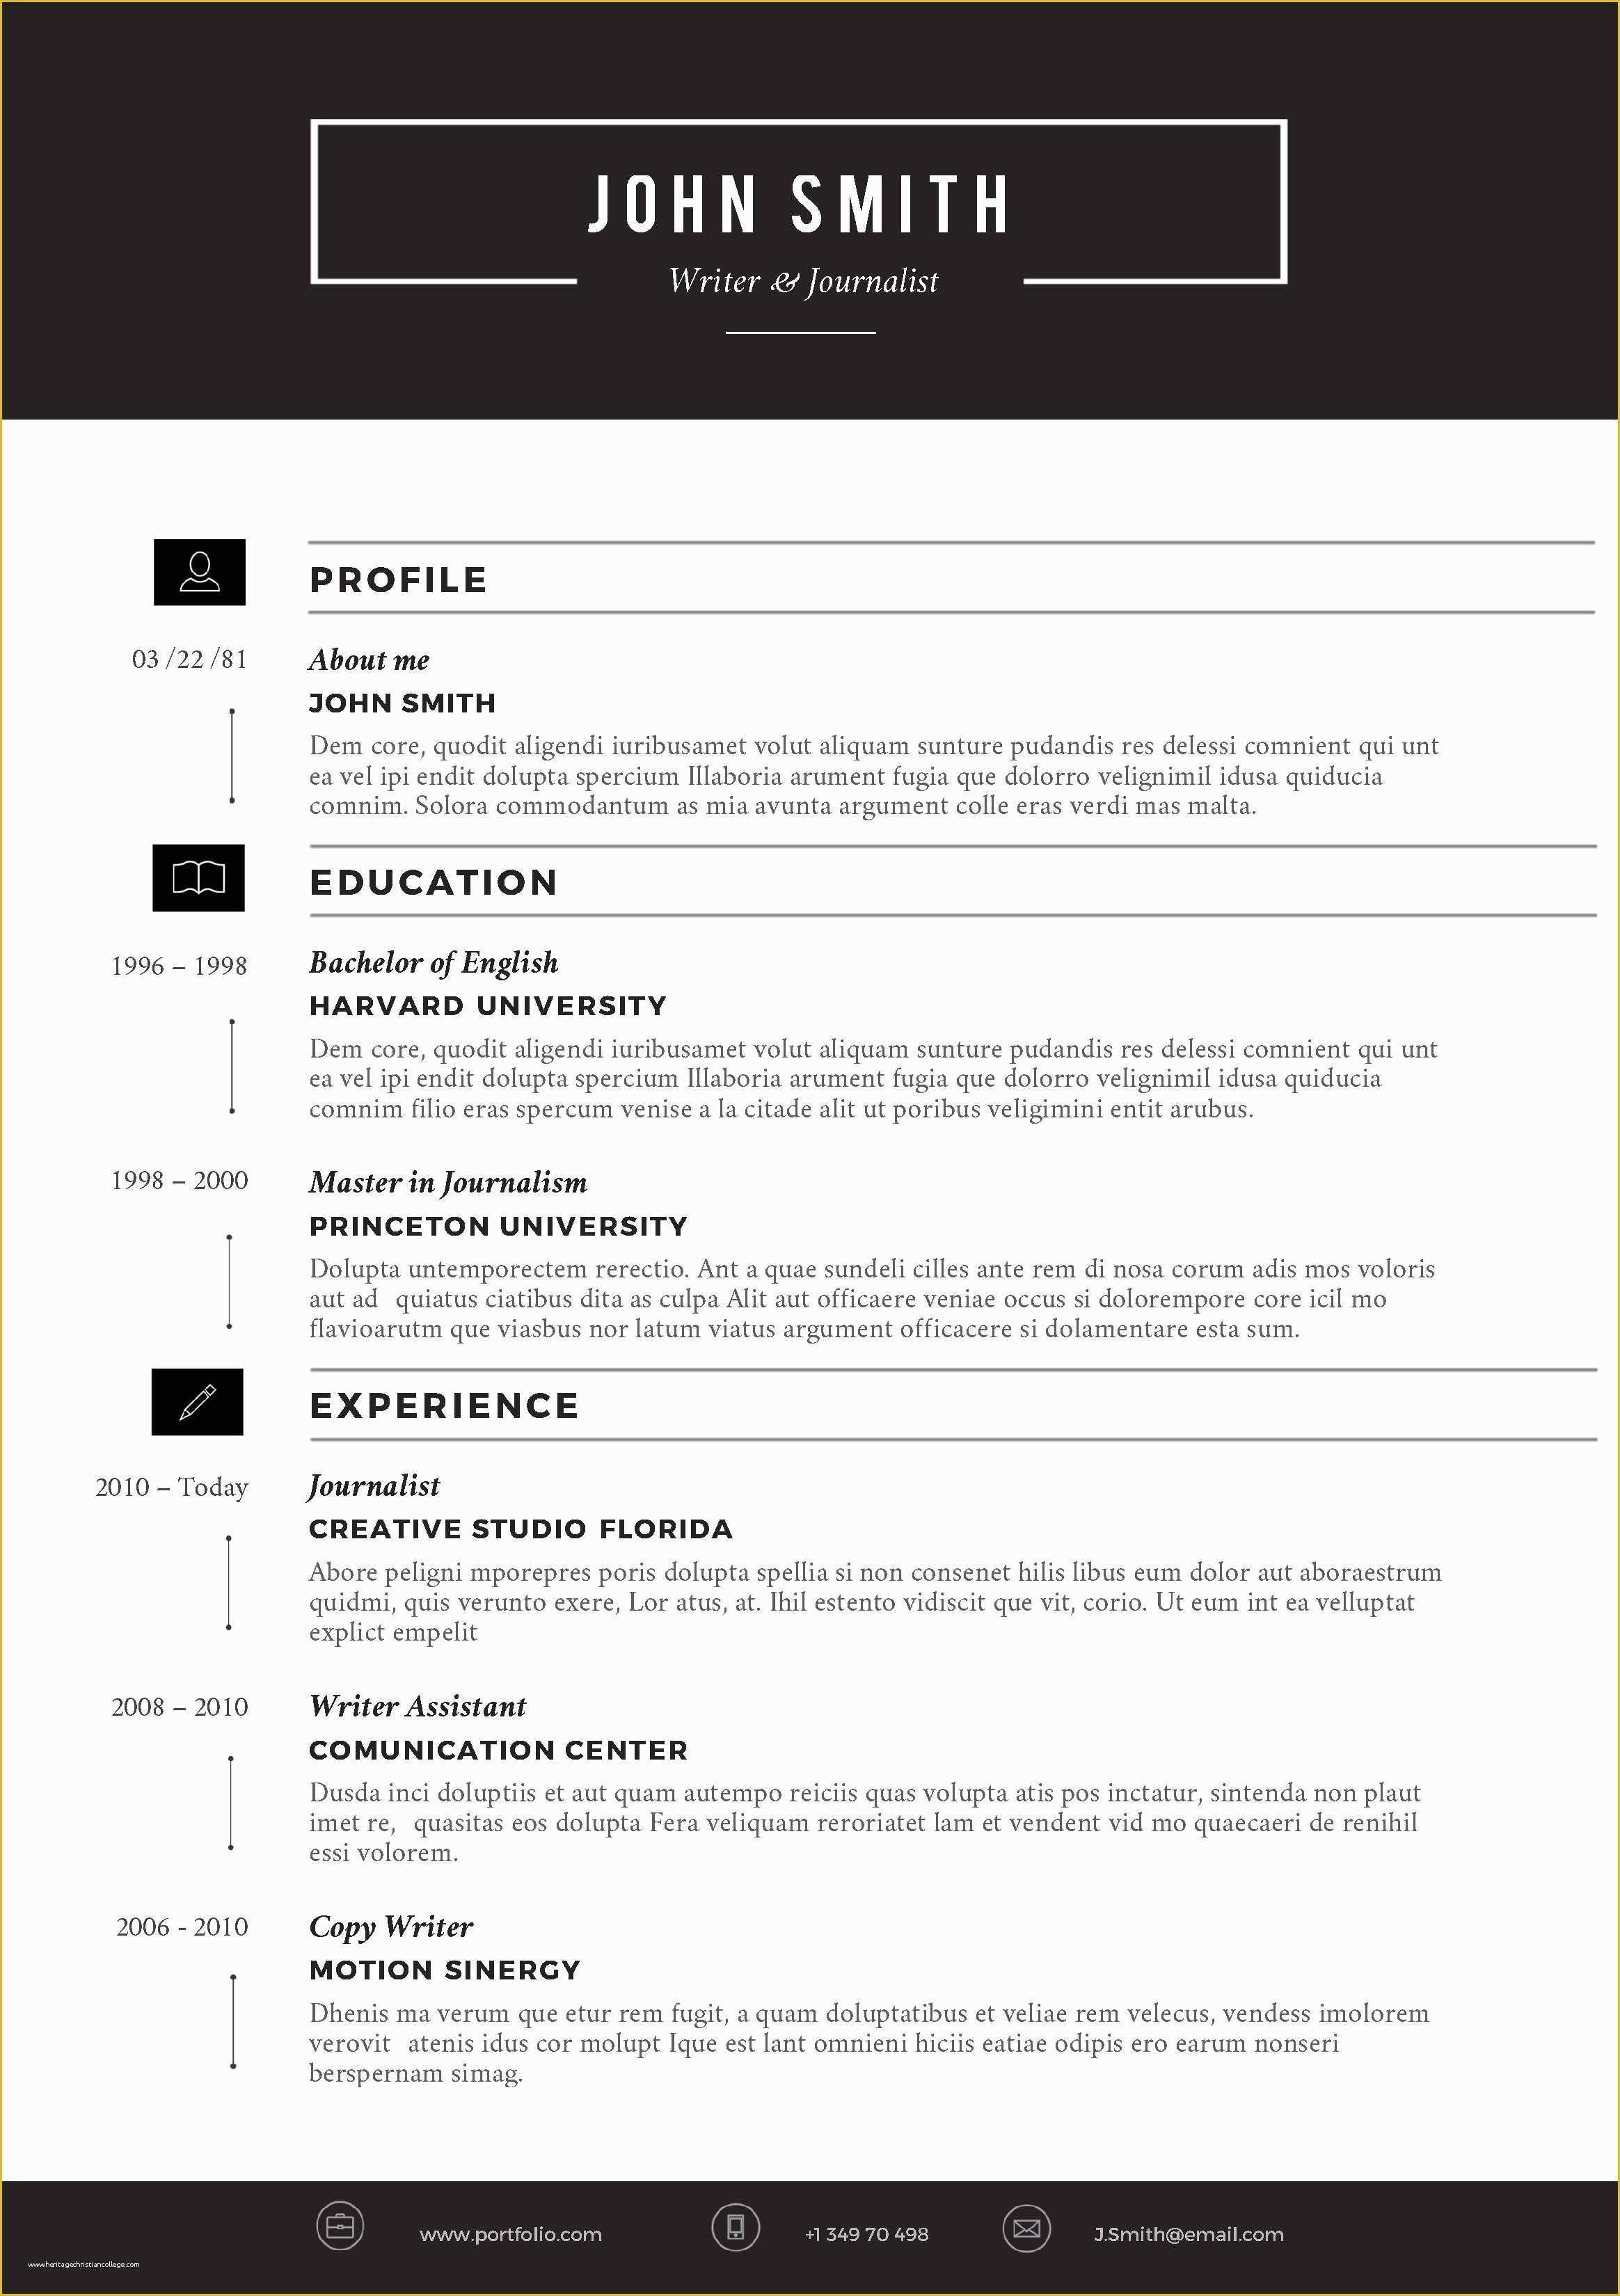 Free Resume Outline Template Of Creative Resume Template by Cvfolio Resumes